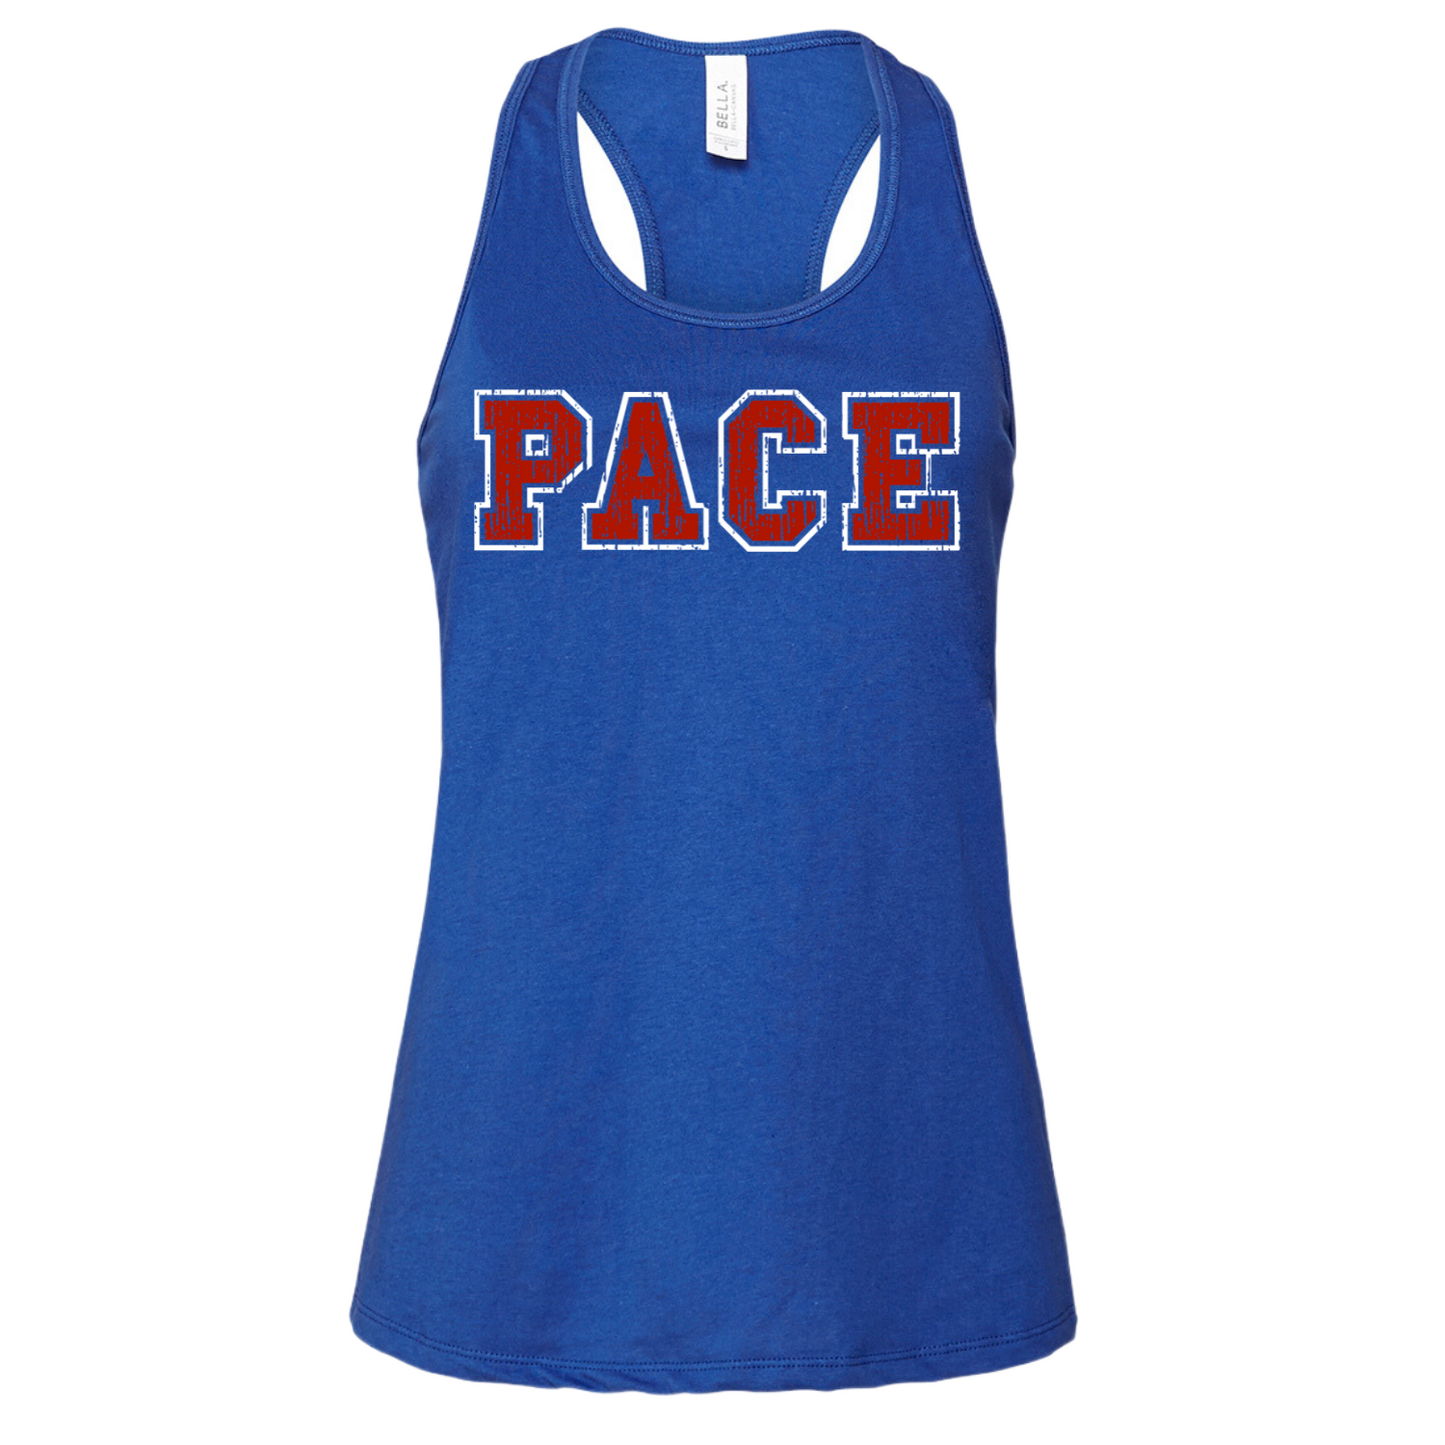 Pace Distressed Racerback Tank